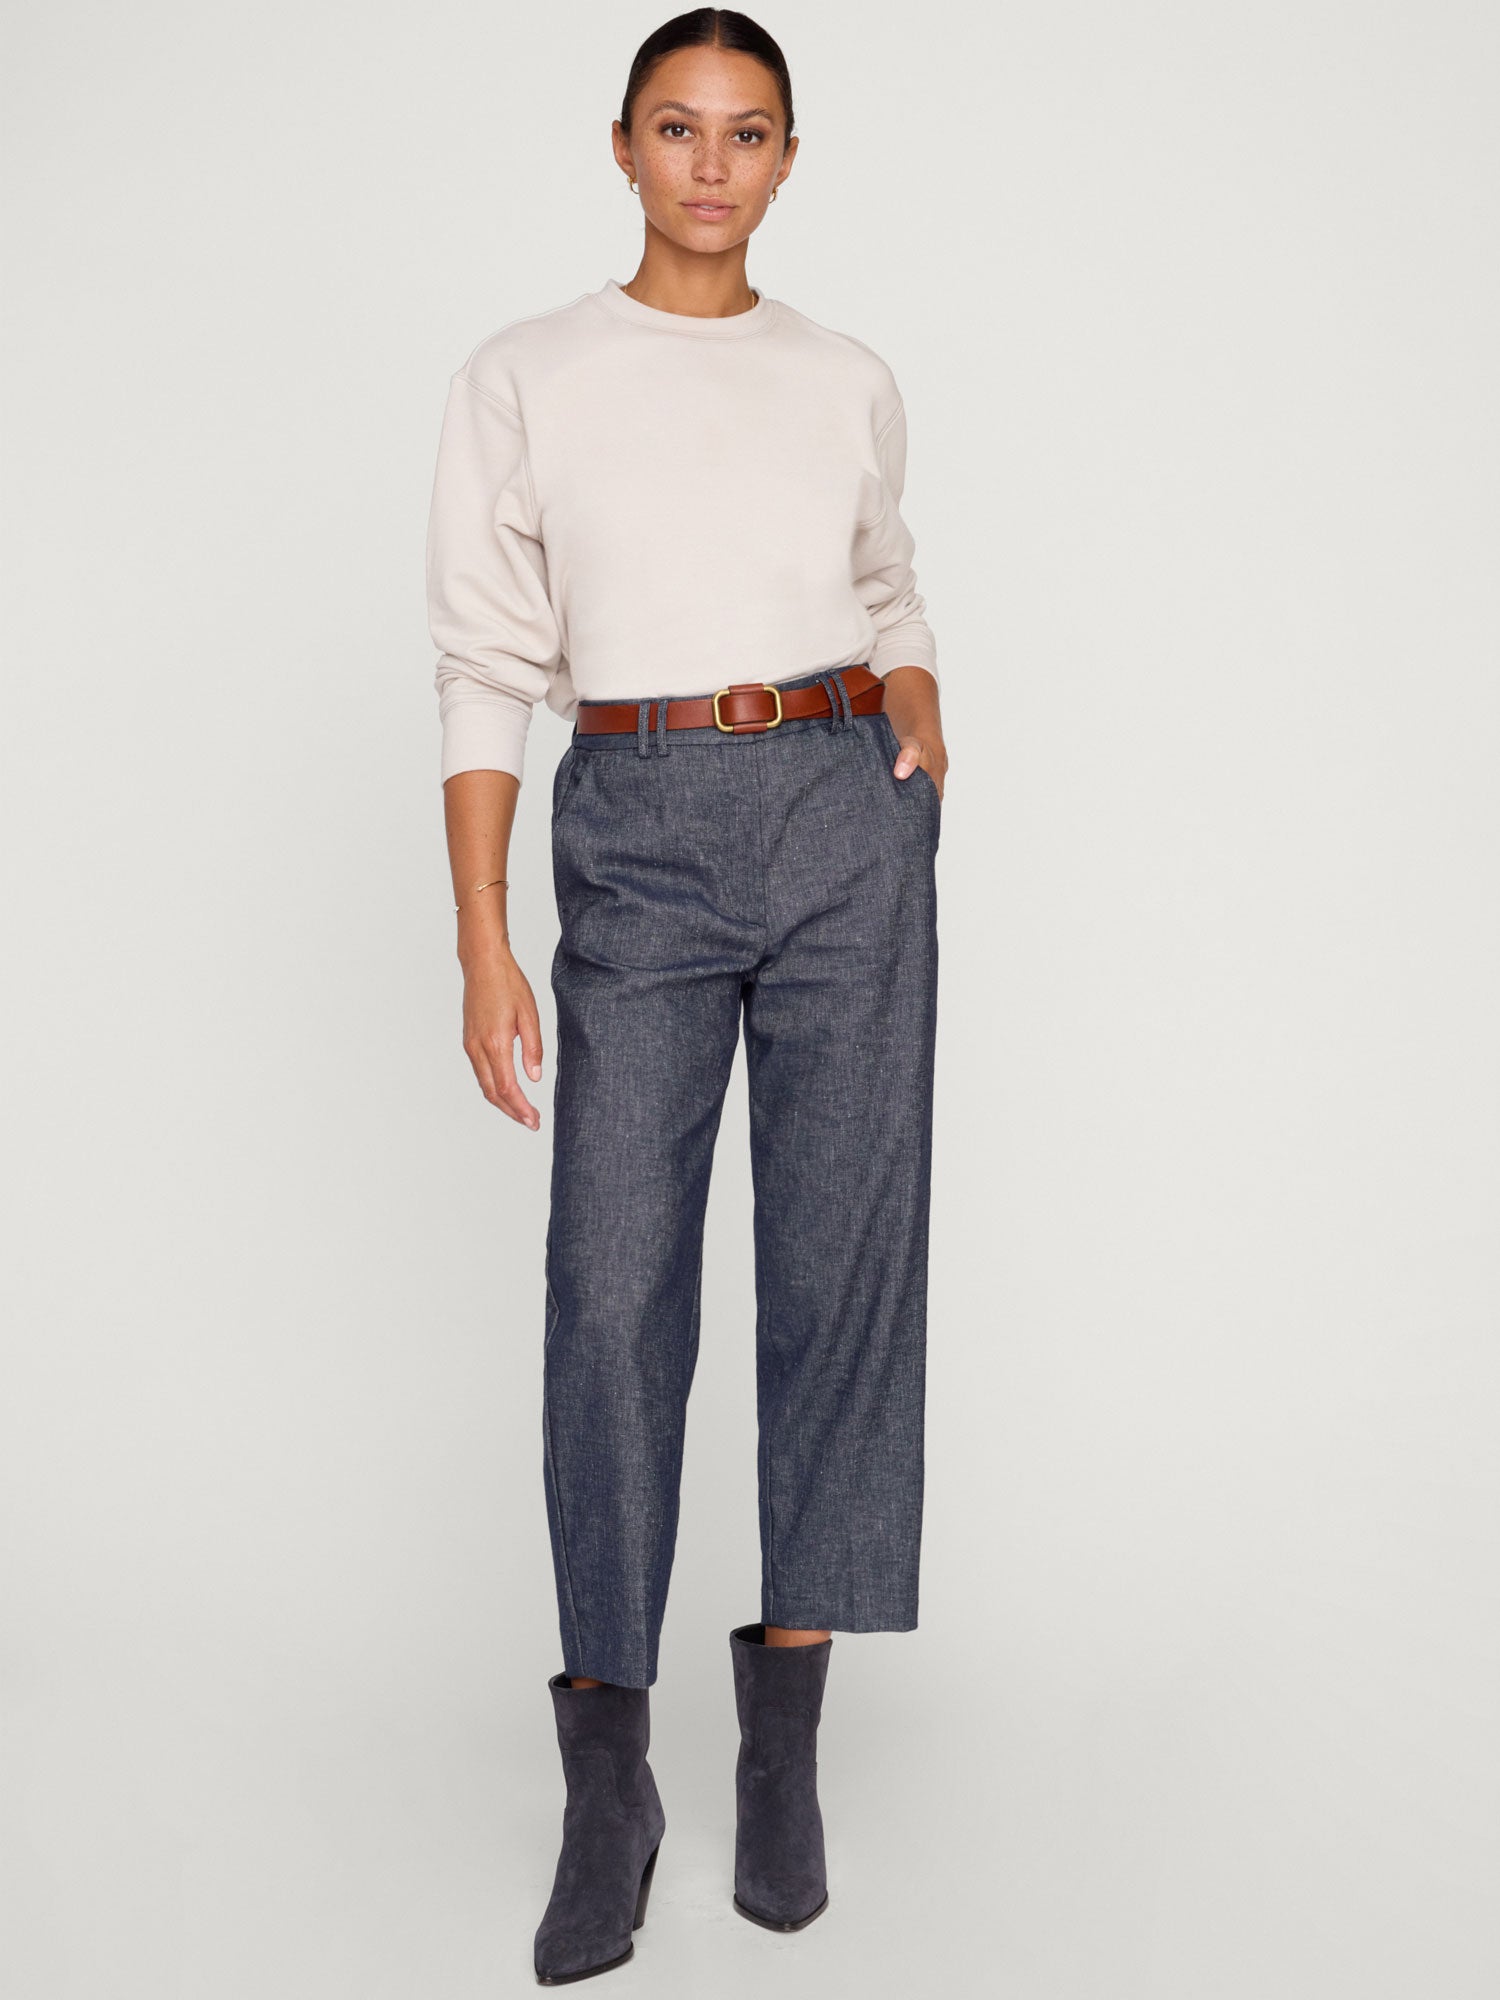 Talia blue cropped cotton linen pant full view 2